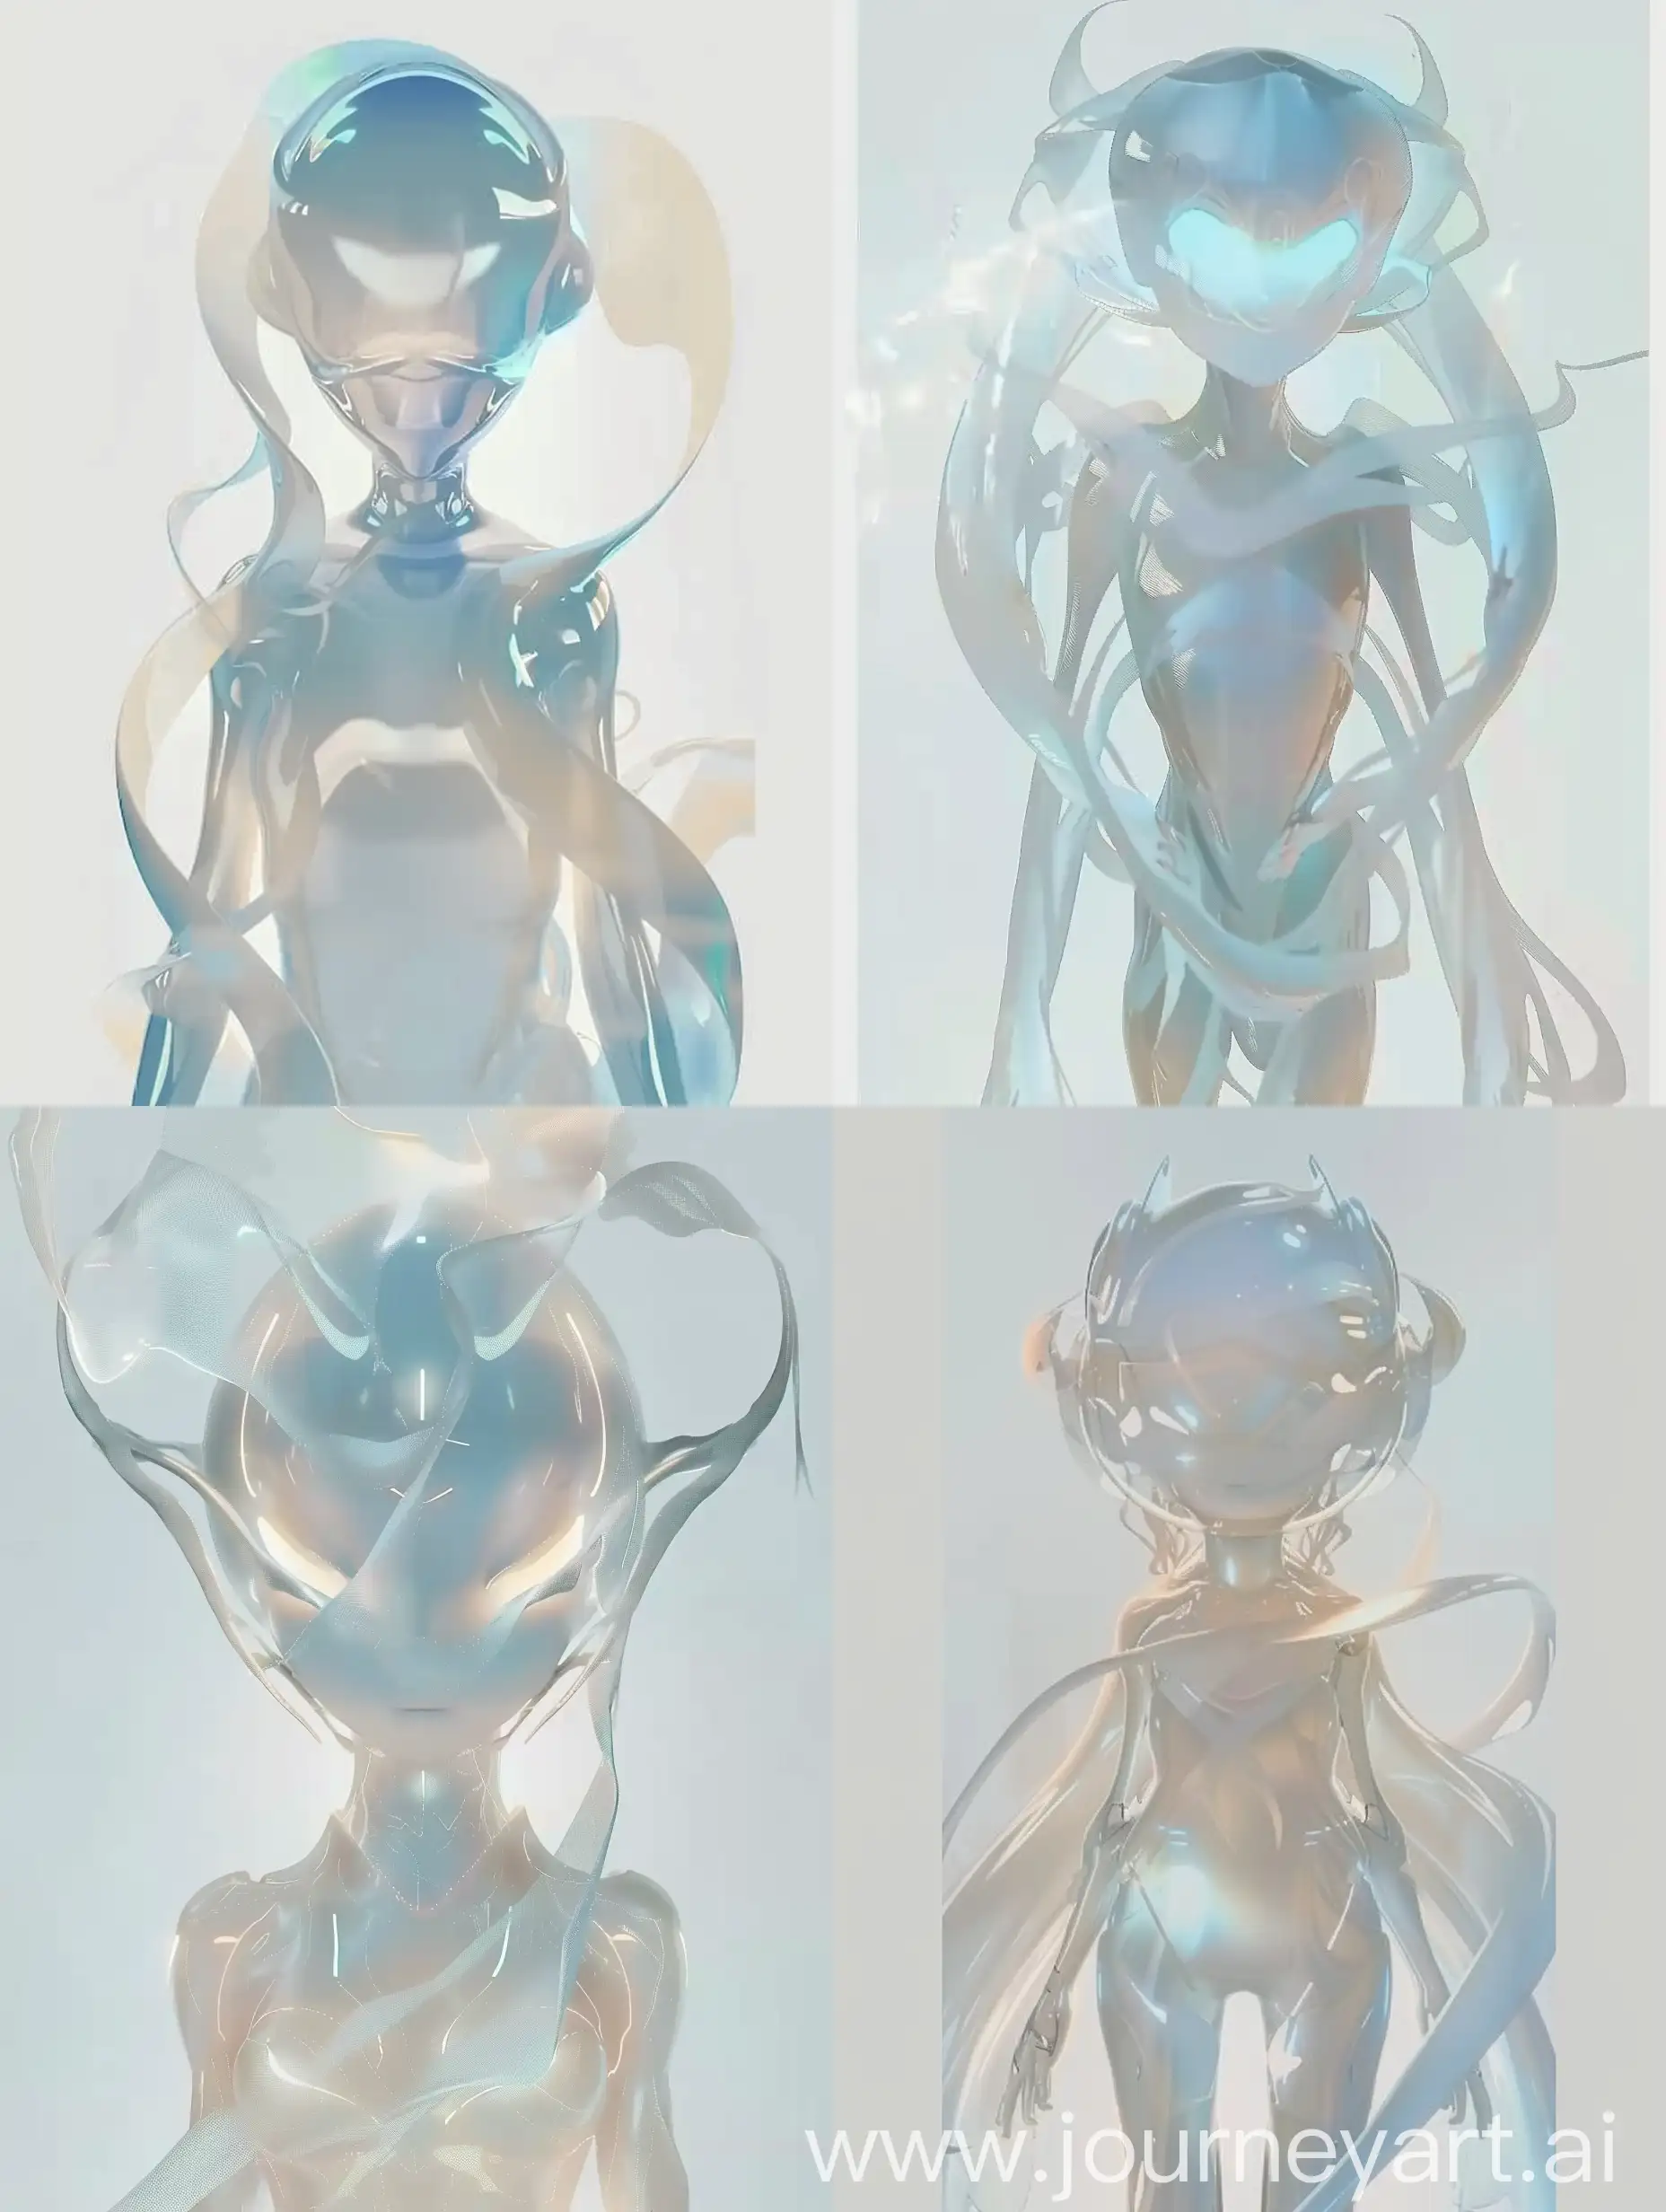 Futuristic-Ethereal-Character-with-Bioluminescent-Glow